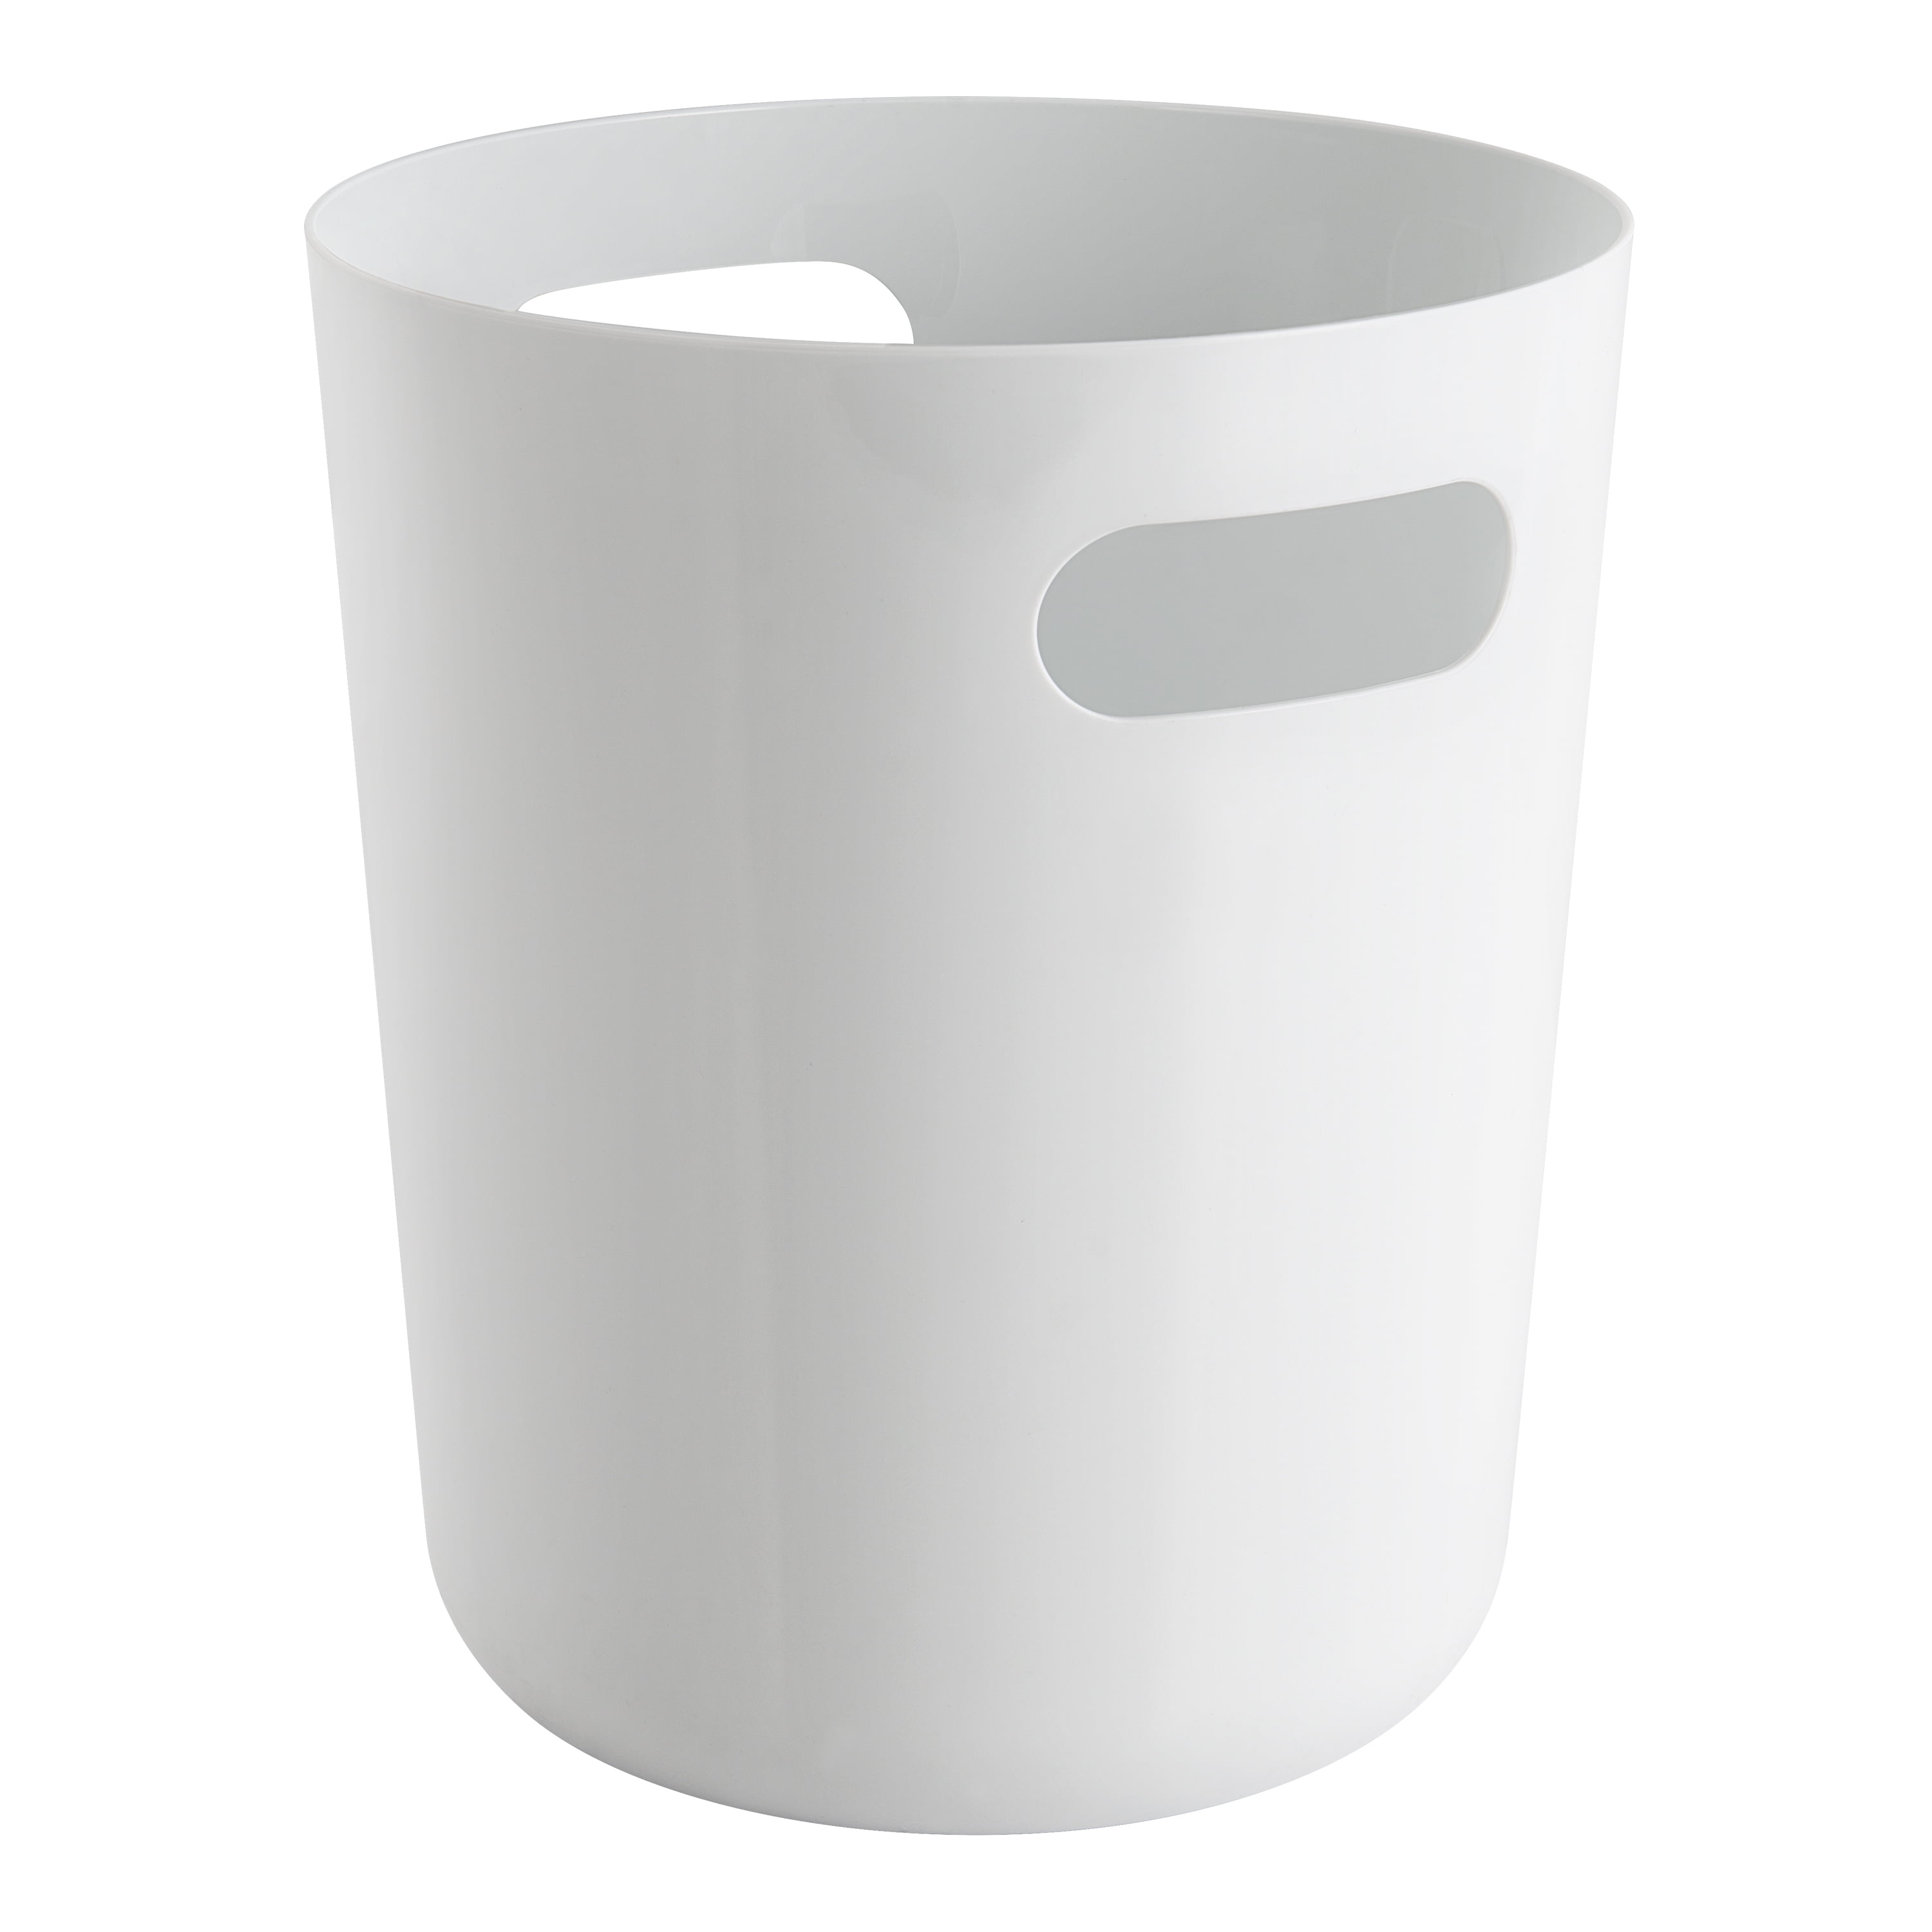 Mainstays Basic Plastic 1.45 Gallon Wastebasket in Arctic White for Bathroom, Bedroom or Office